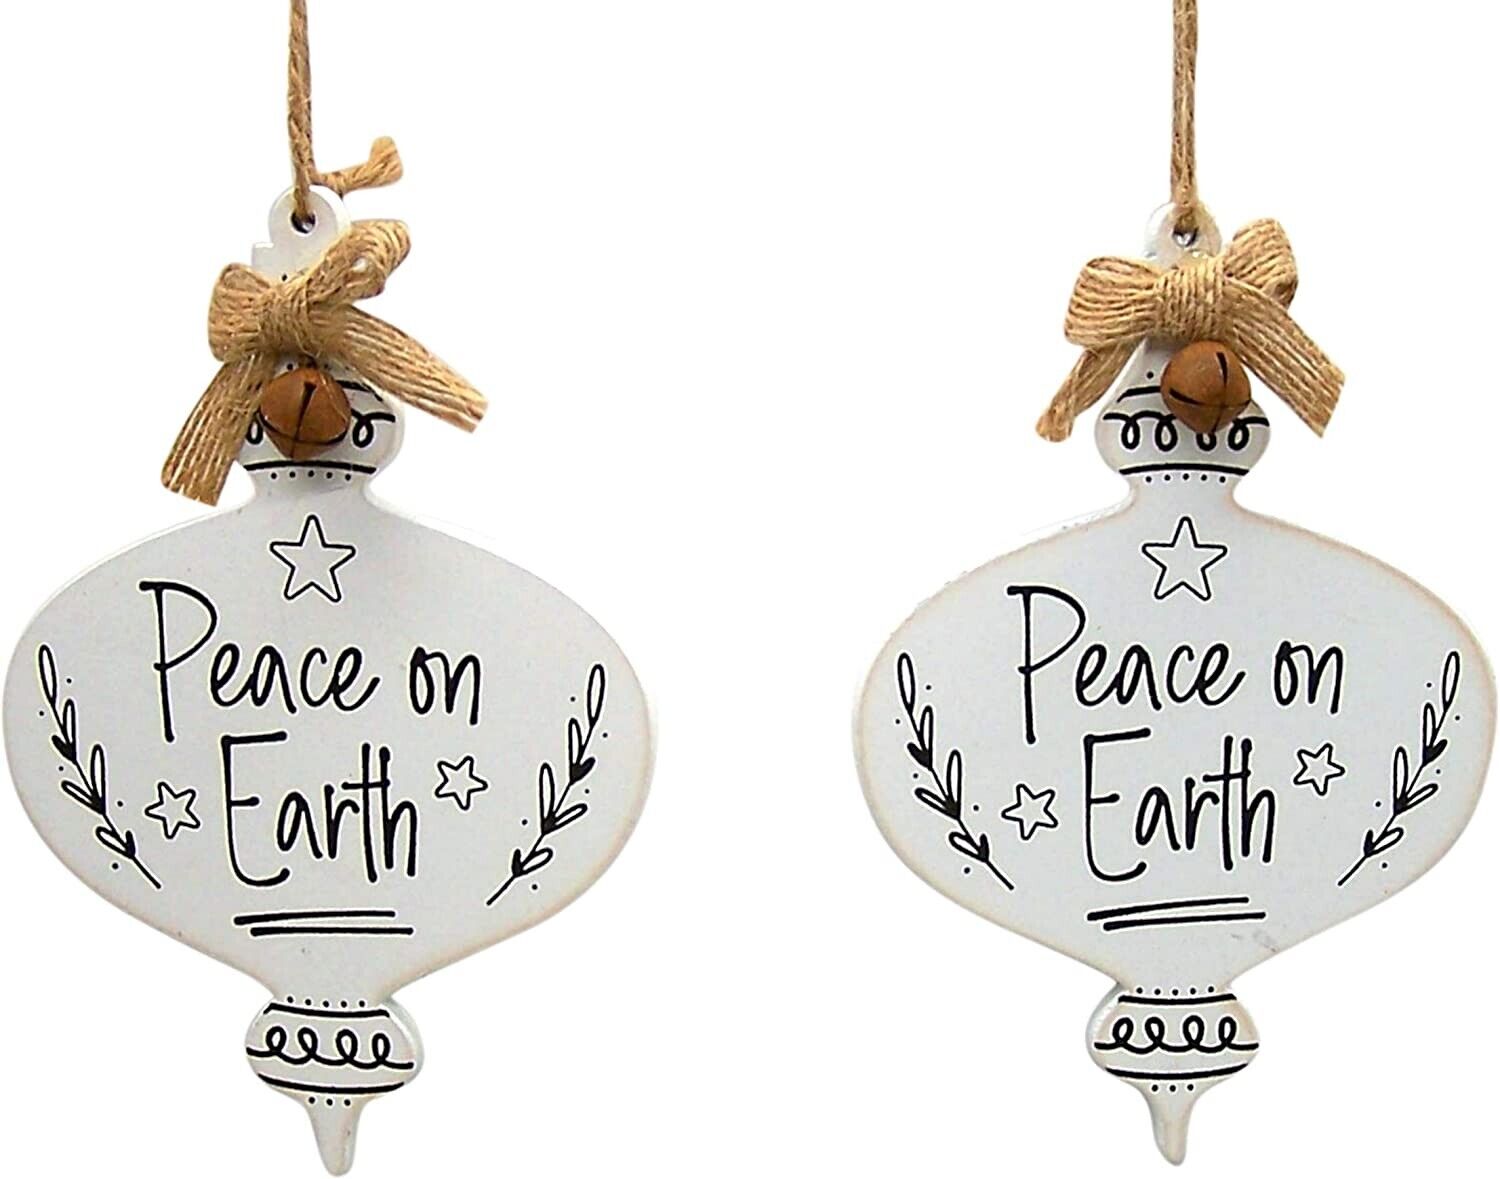  'Peace on Earth' Ivory Christmas Ornaments, 5 Inches, Set of 2